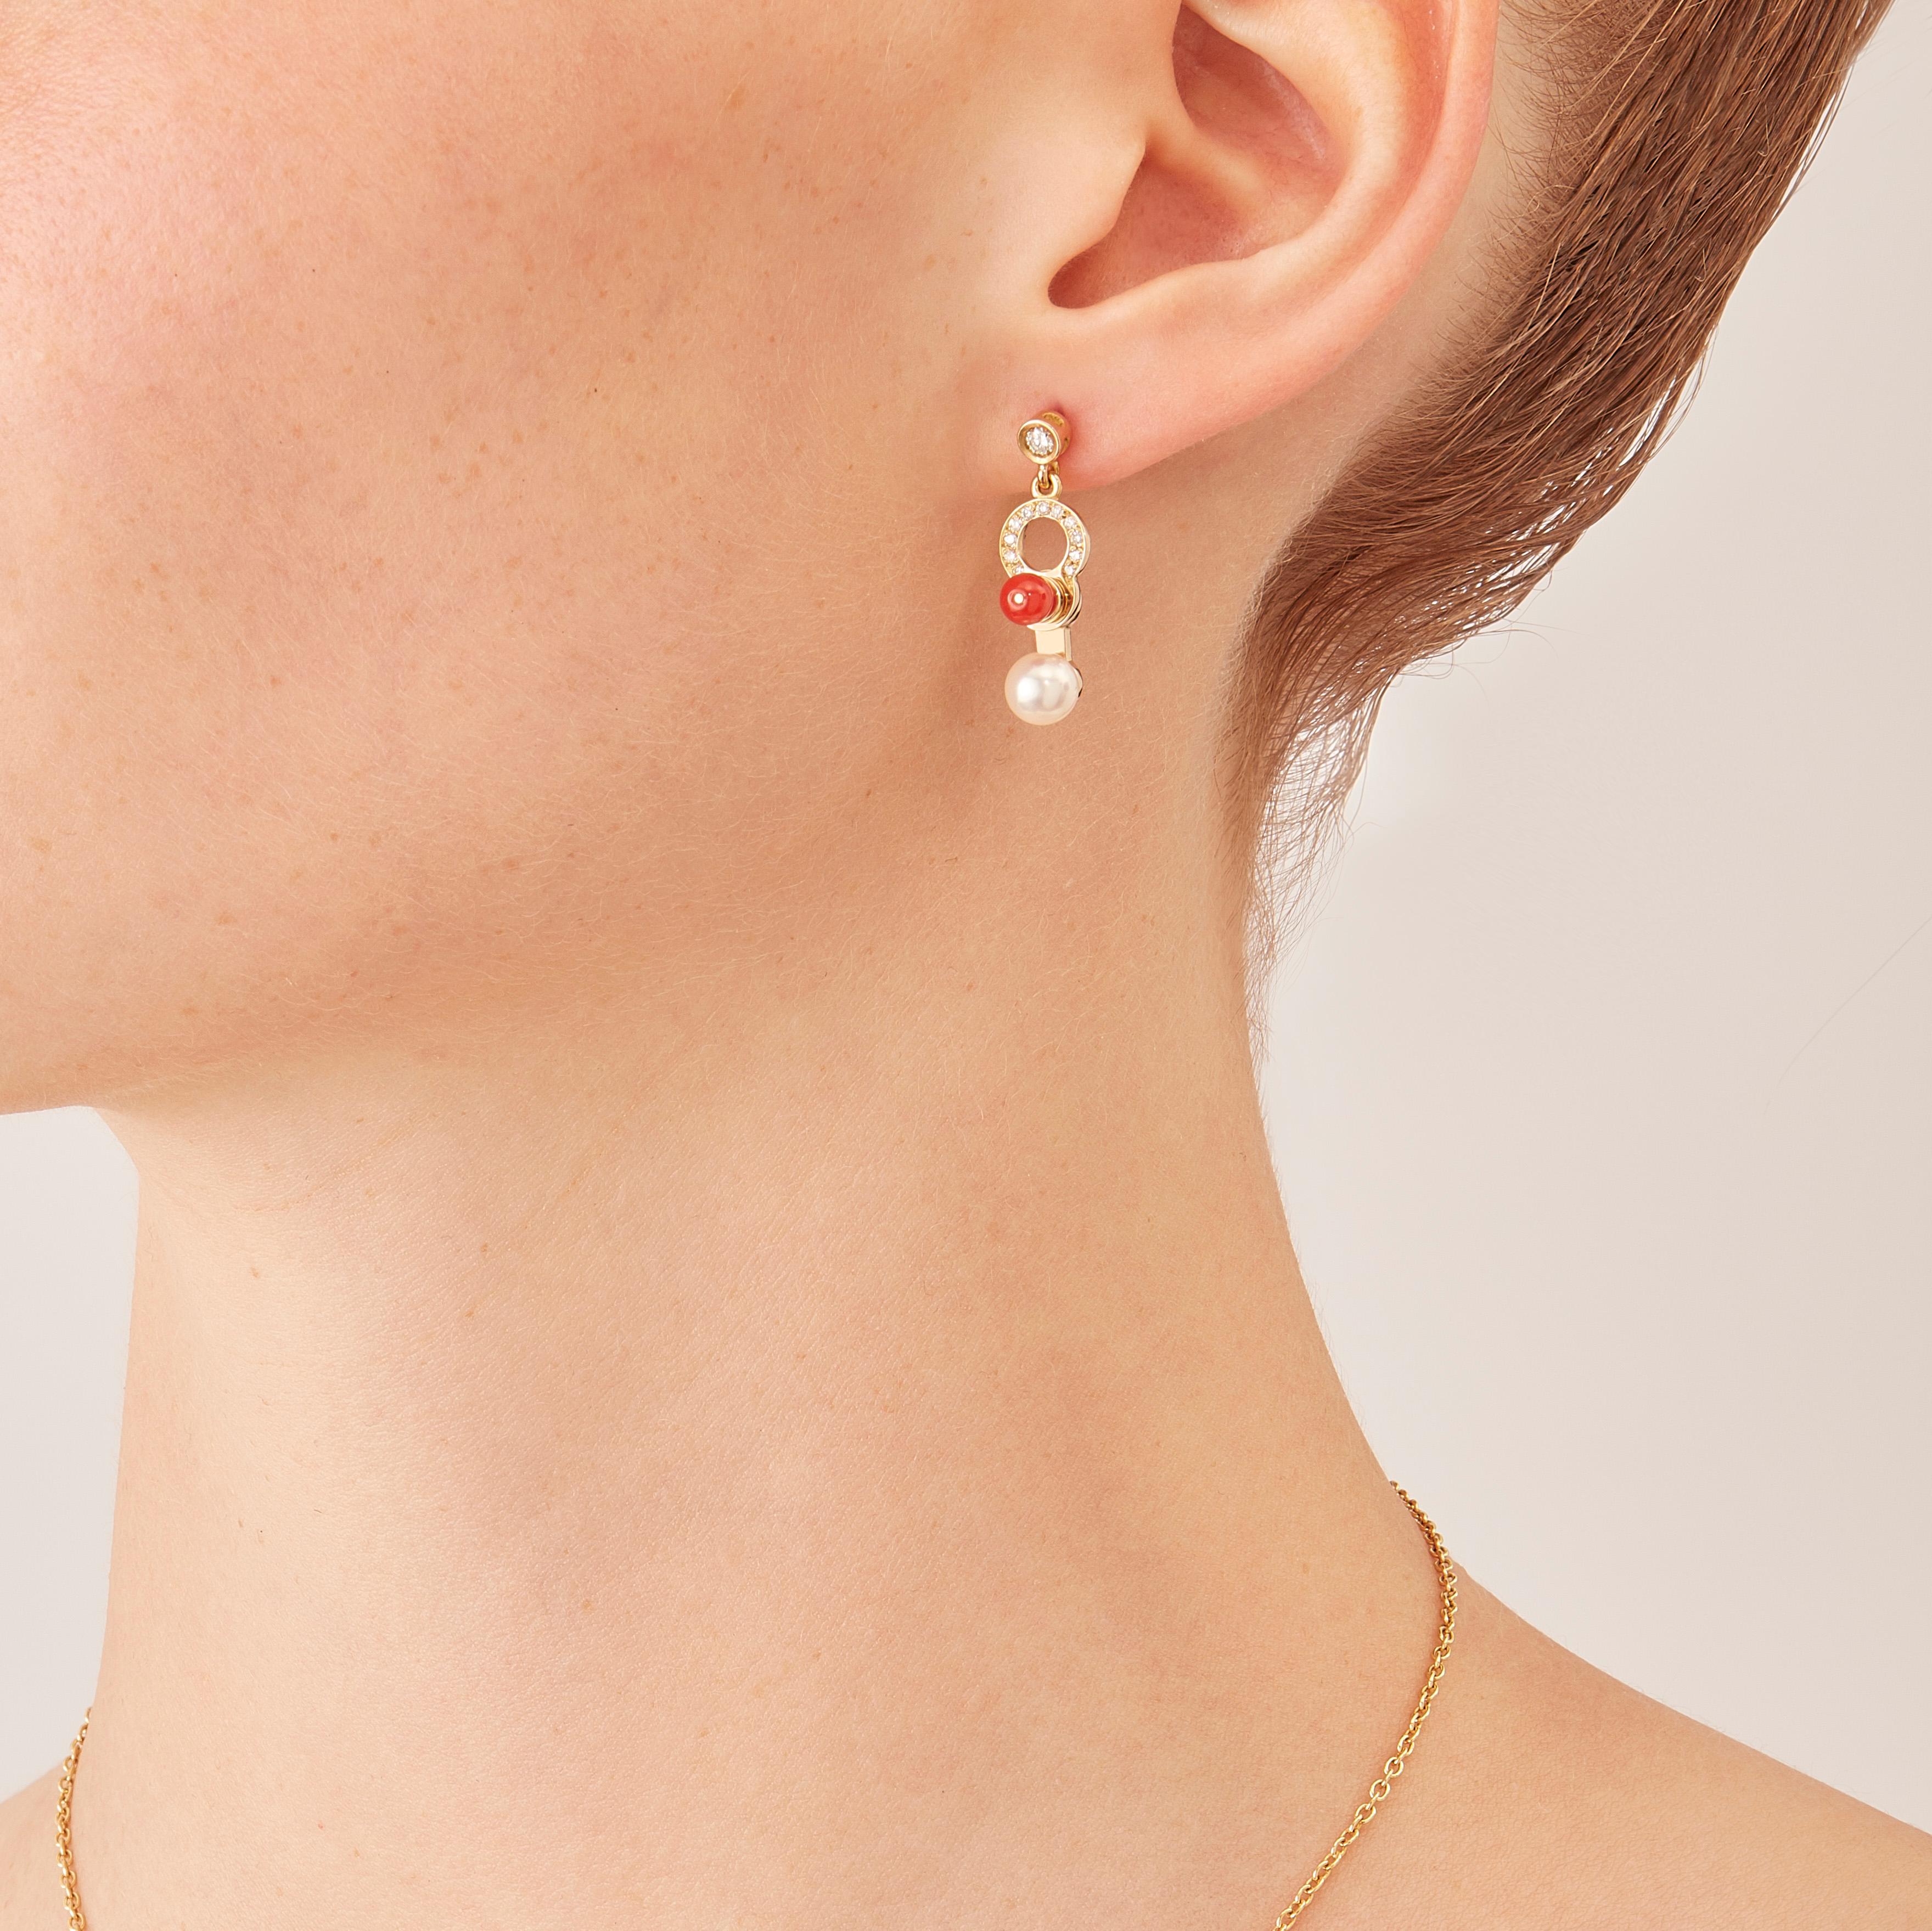 Made by hand in Nathalie Jean's Milan atelier, Microcosmos drop earrings, are devised as a game, a construction or a sophisticated aerial mobile. Shapes attached to rings dangle lightly on the ear, their geometry pierced by diamonds (0,21 carats),